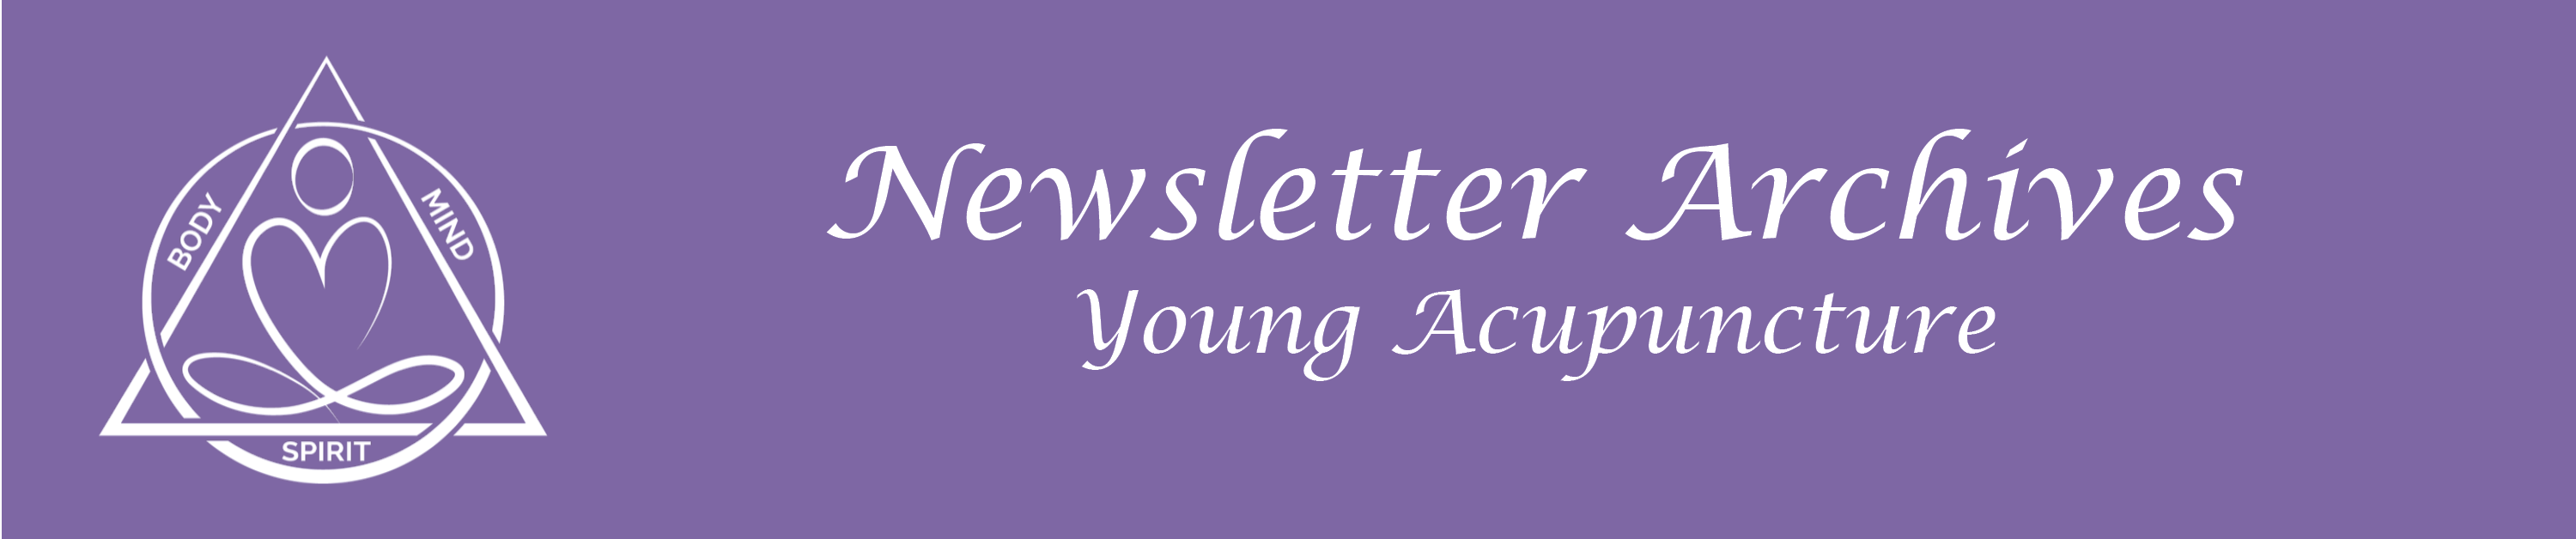 Newsletter Archives - Young Acupuncture